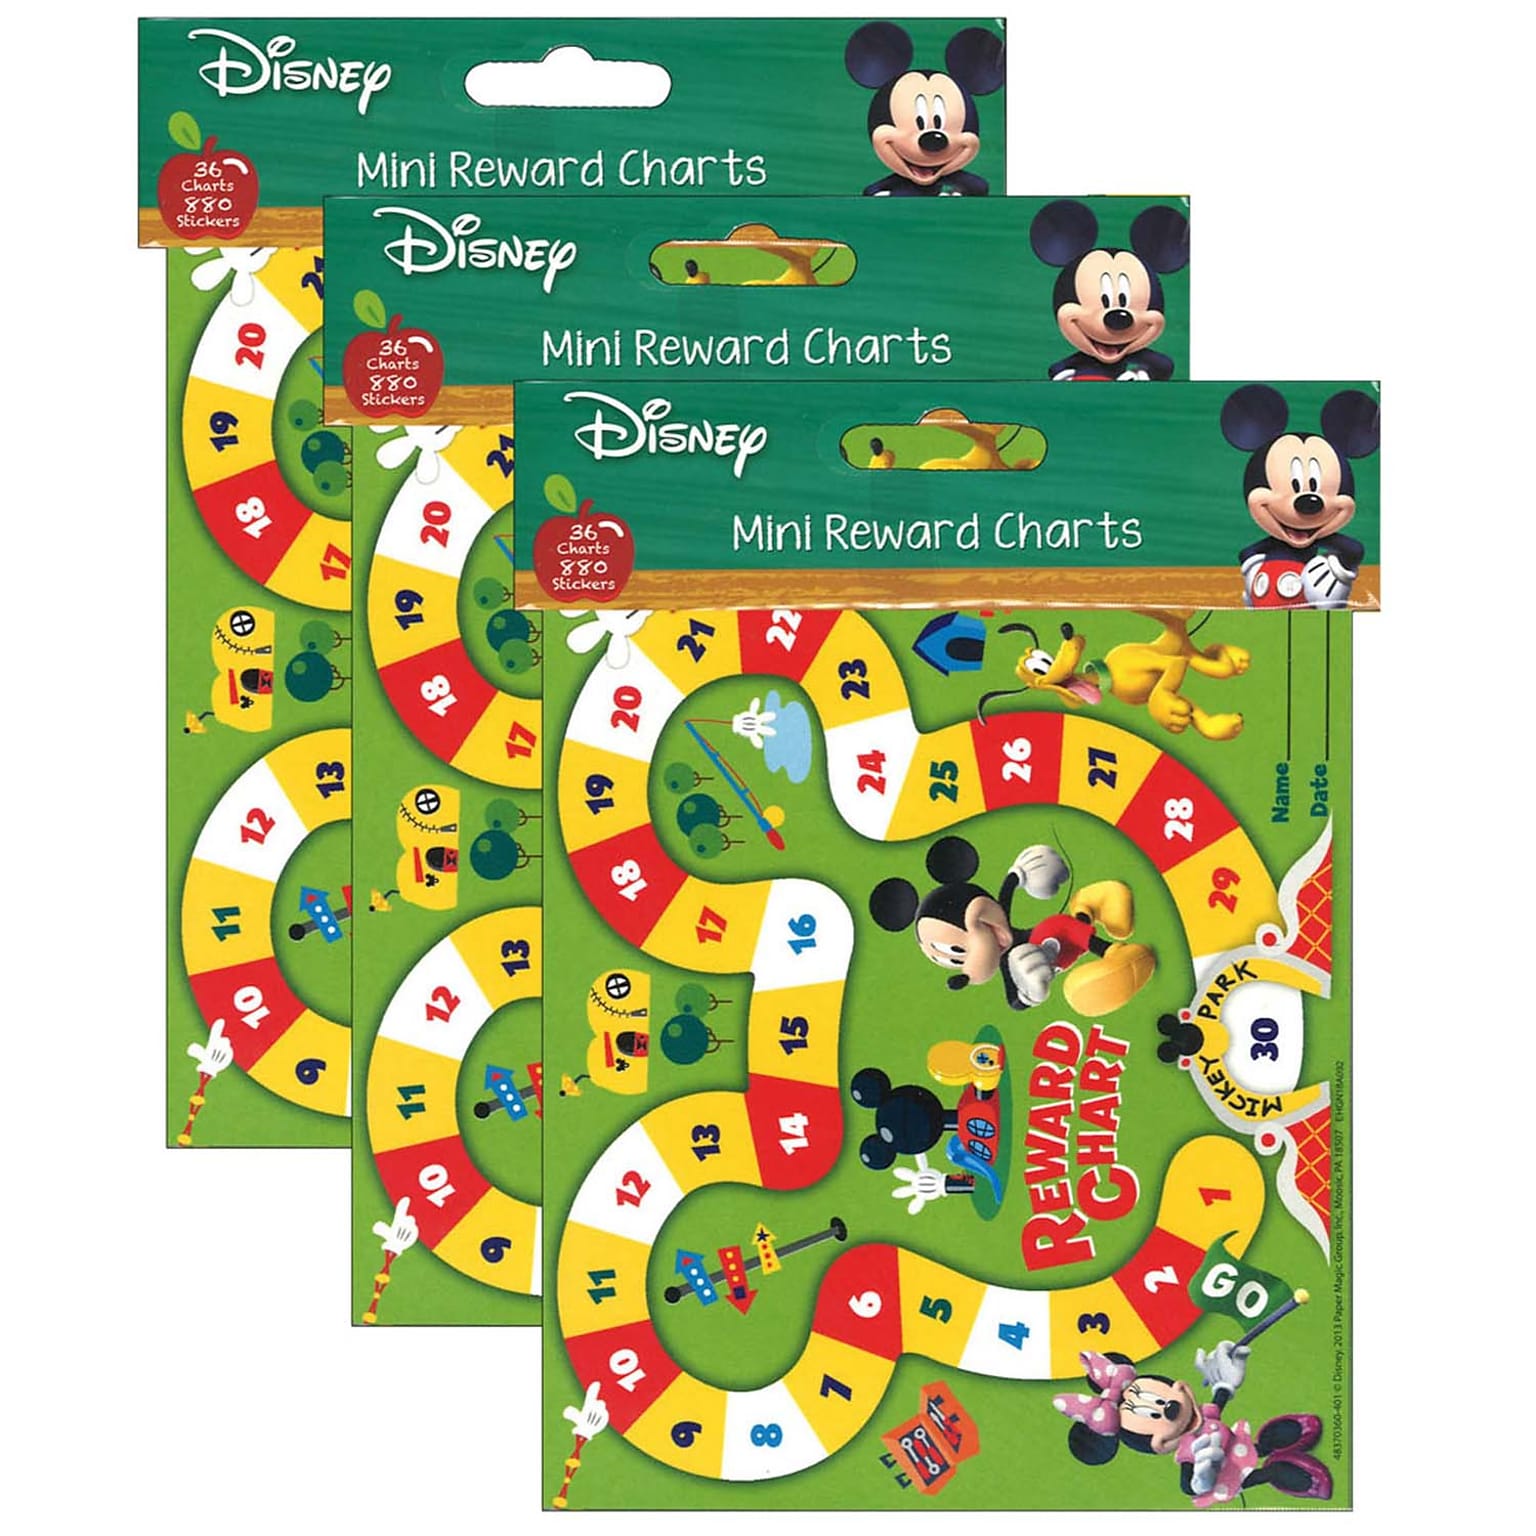 Eureka Mickey Mouse Clubhouse Mickey Park Mini Reward Charts with Stickers, 36 Charts Per Pack, 3 Packs (EU-837036-3)